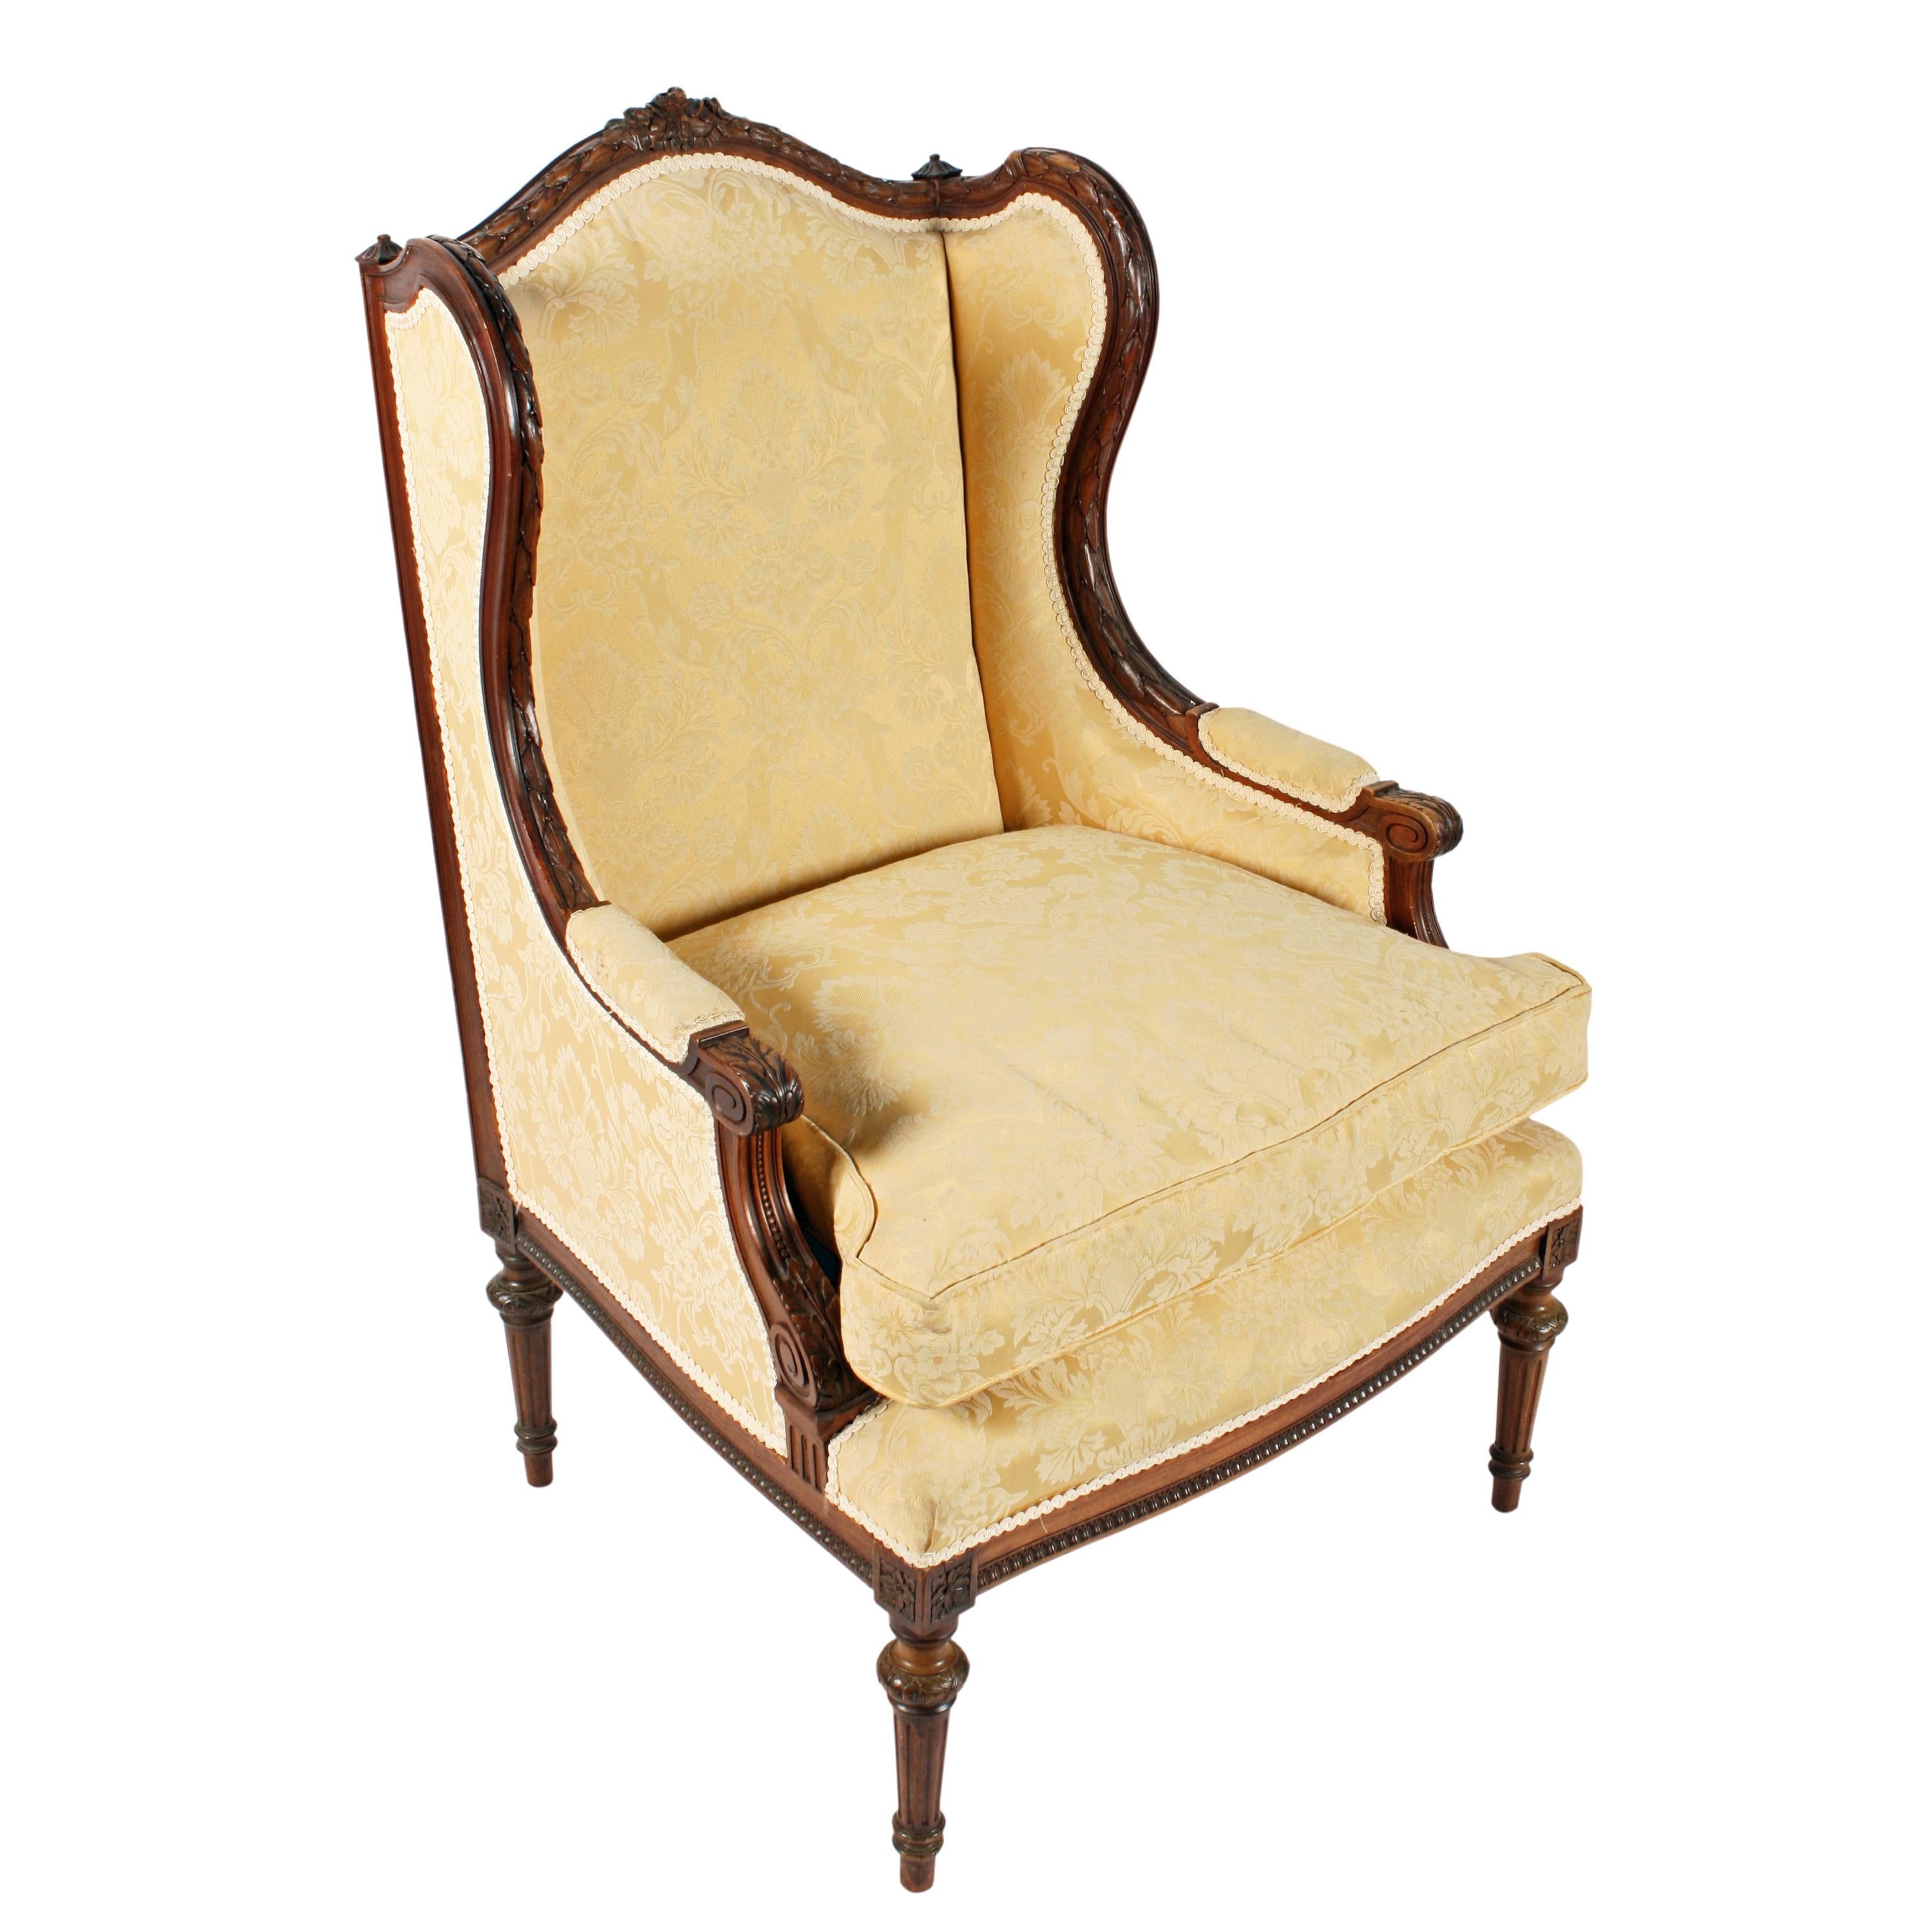 A late 19th century French carved walnut fauteuil or armchair.

The chair has a high winged back with a carved frame with a domed to rail that is decorated with carved roses and ribbons.

The upholstered arm rests have a carved scroll hand rest